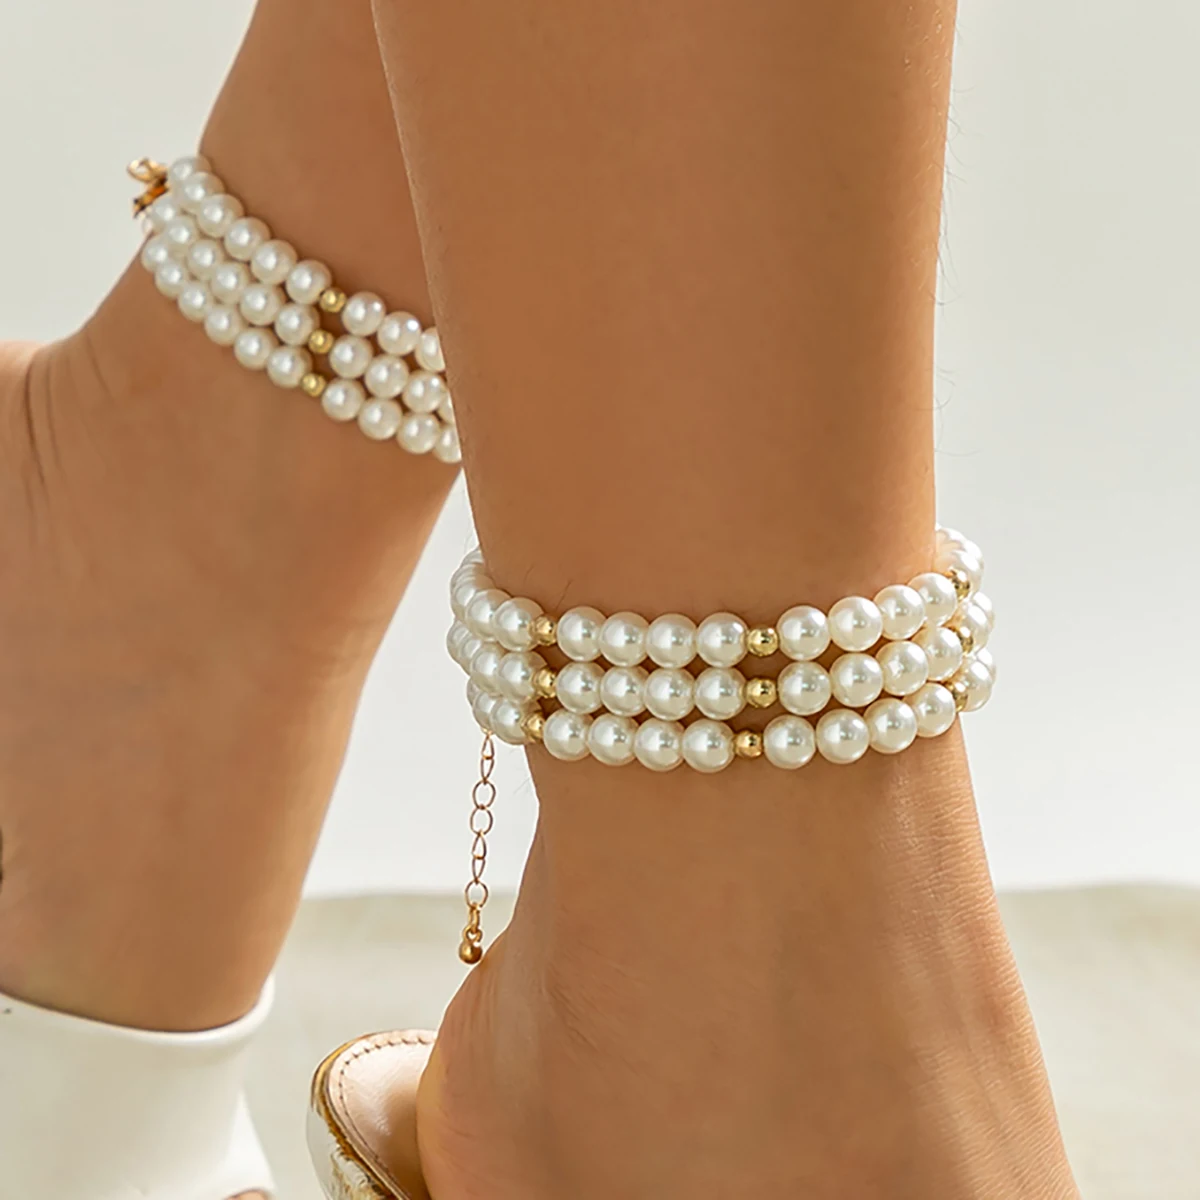 

Salircon Simple Multilayer Imitation Pearl Beads Anklet Ankle Fashion Charm Leg Chain On Foot Wedding Party For Women Jewelry